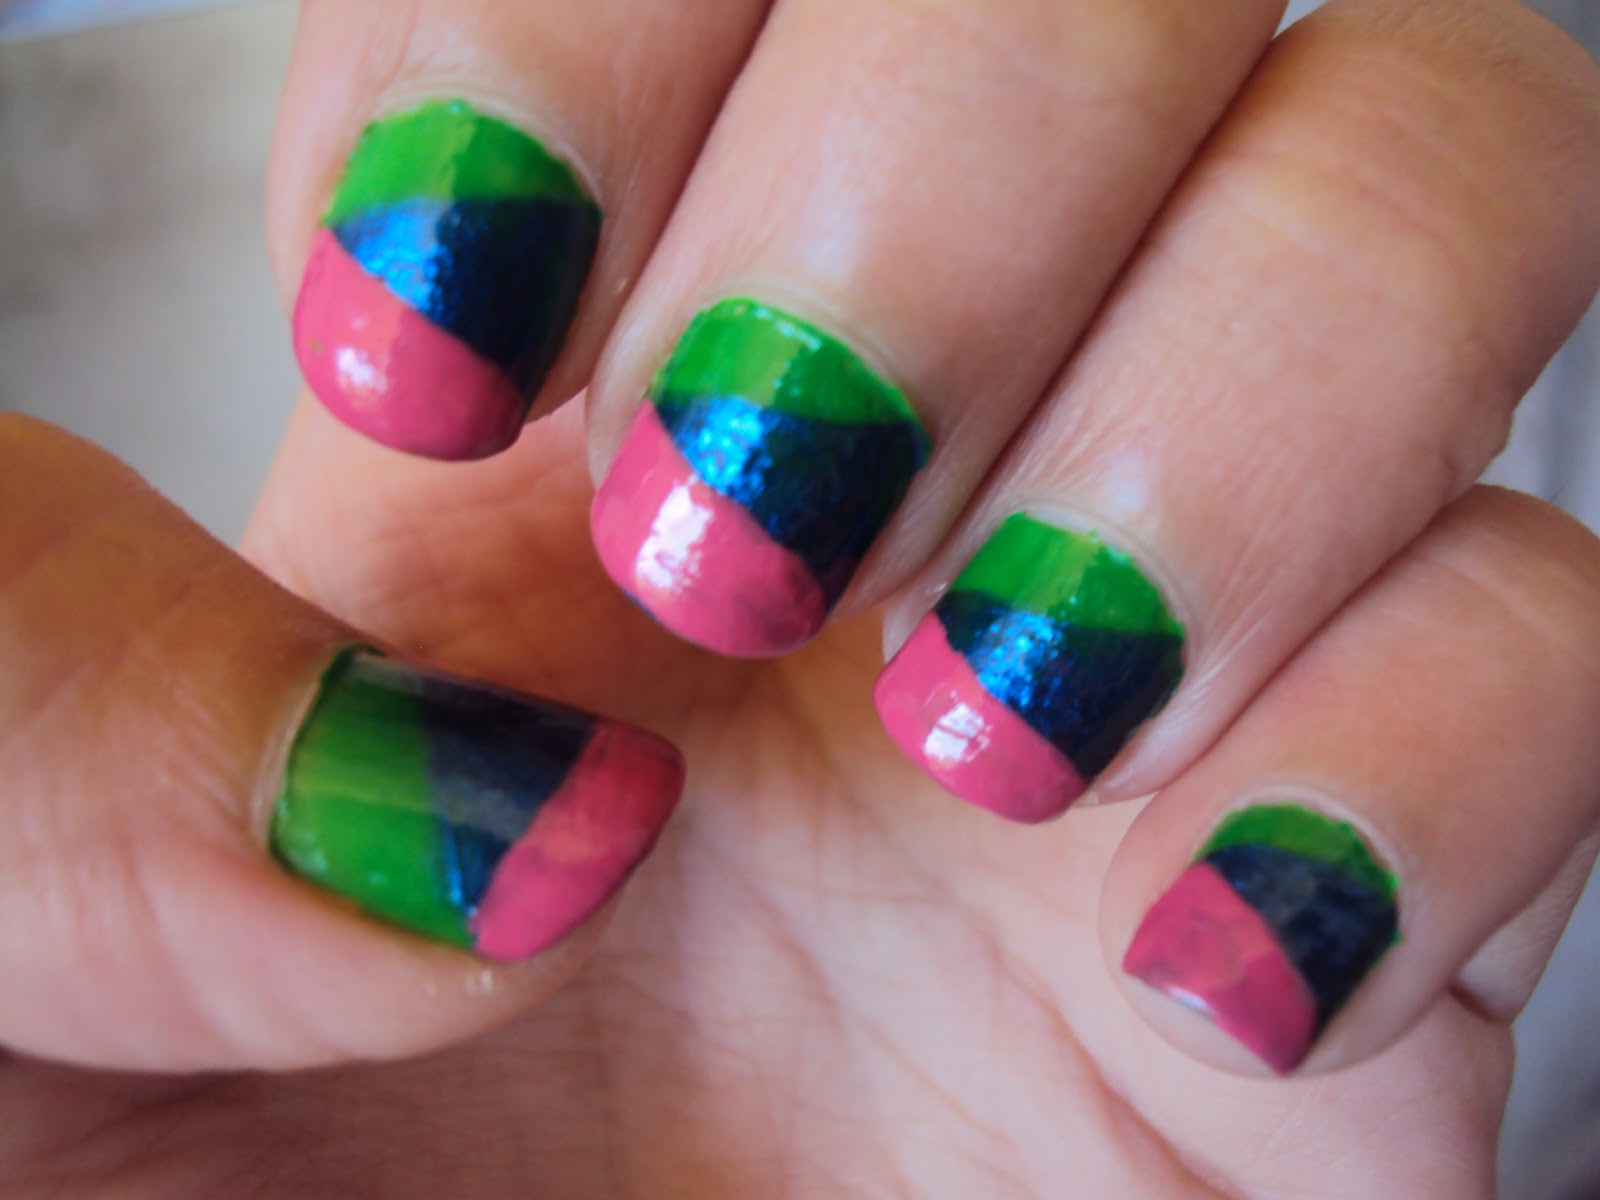 2. "Step-by-Step Color Block Nail Tutorial" - wide 6